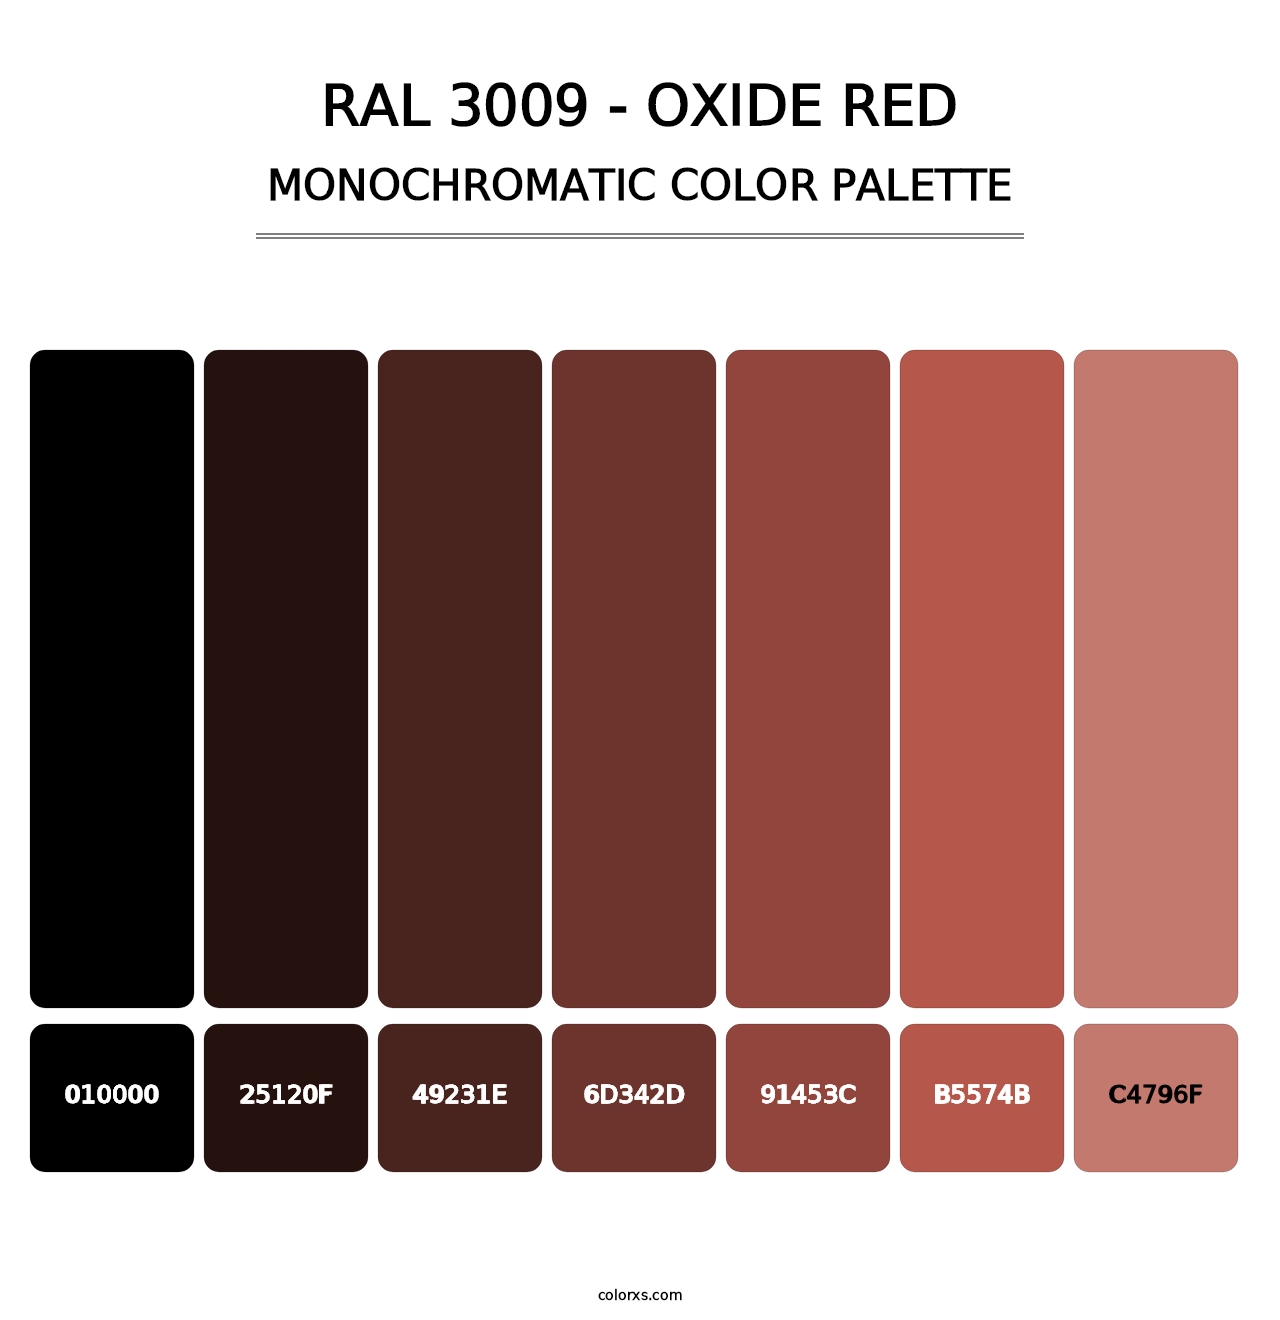 RAL 3009 - Oxide Red - Monochromatic Color Palette